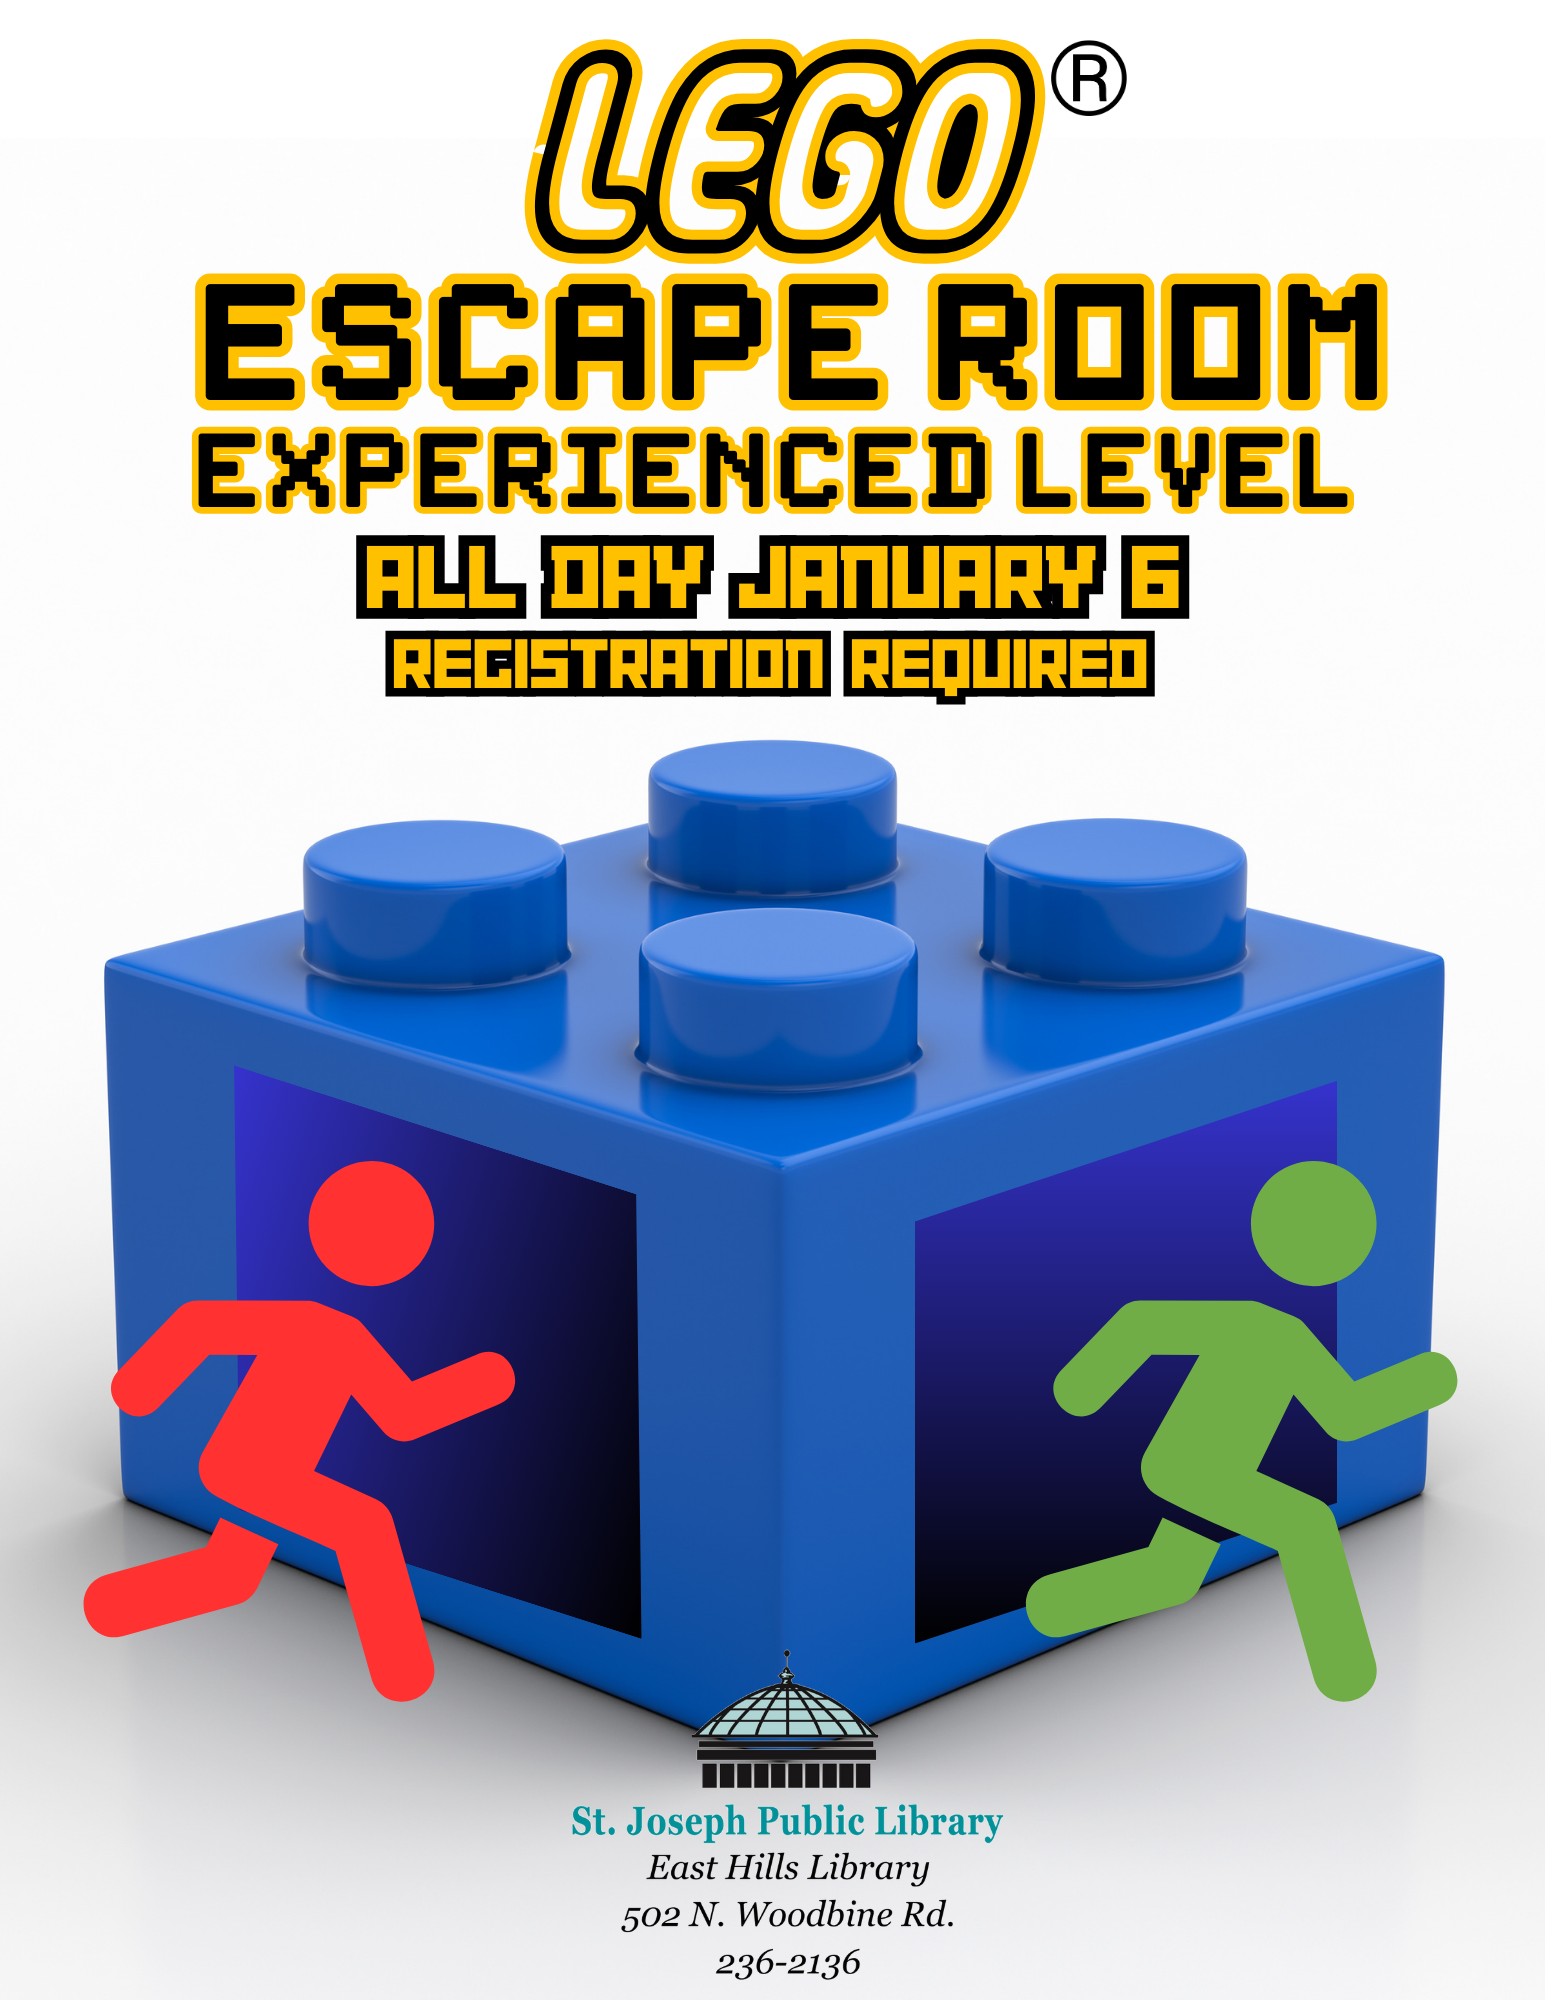 Lego Escape Room Jan. 6 registration required, East Hills Library